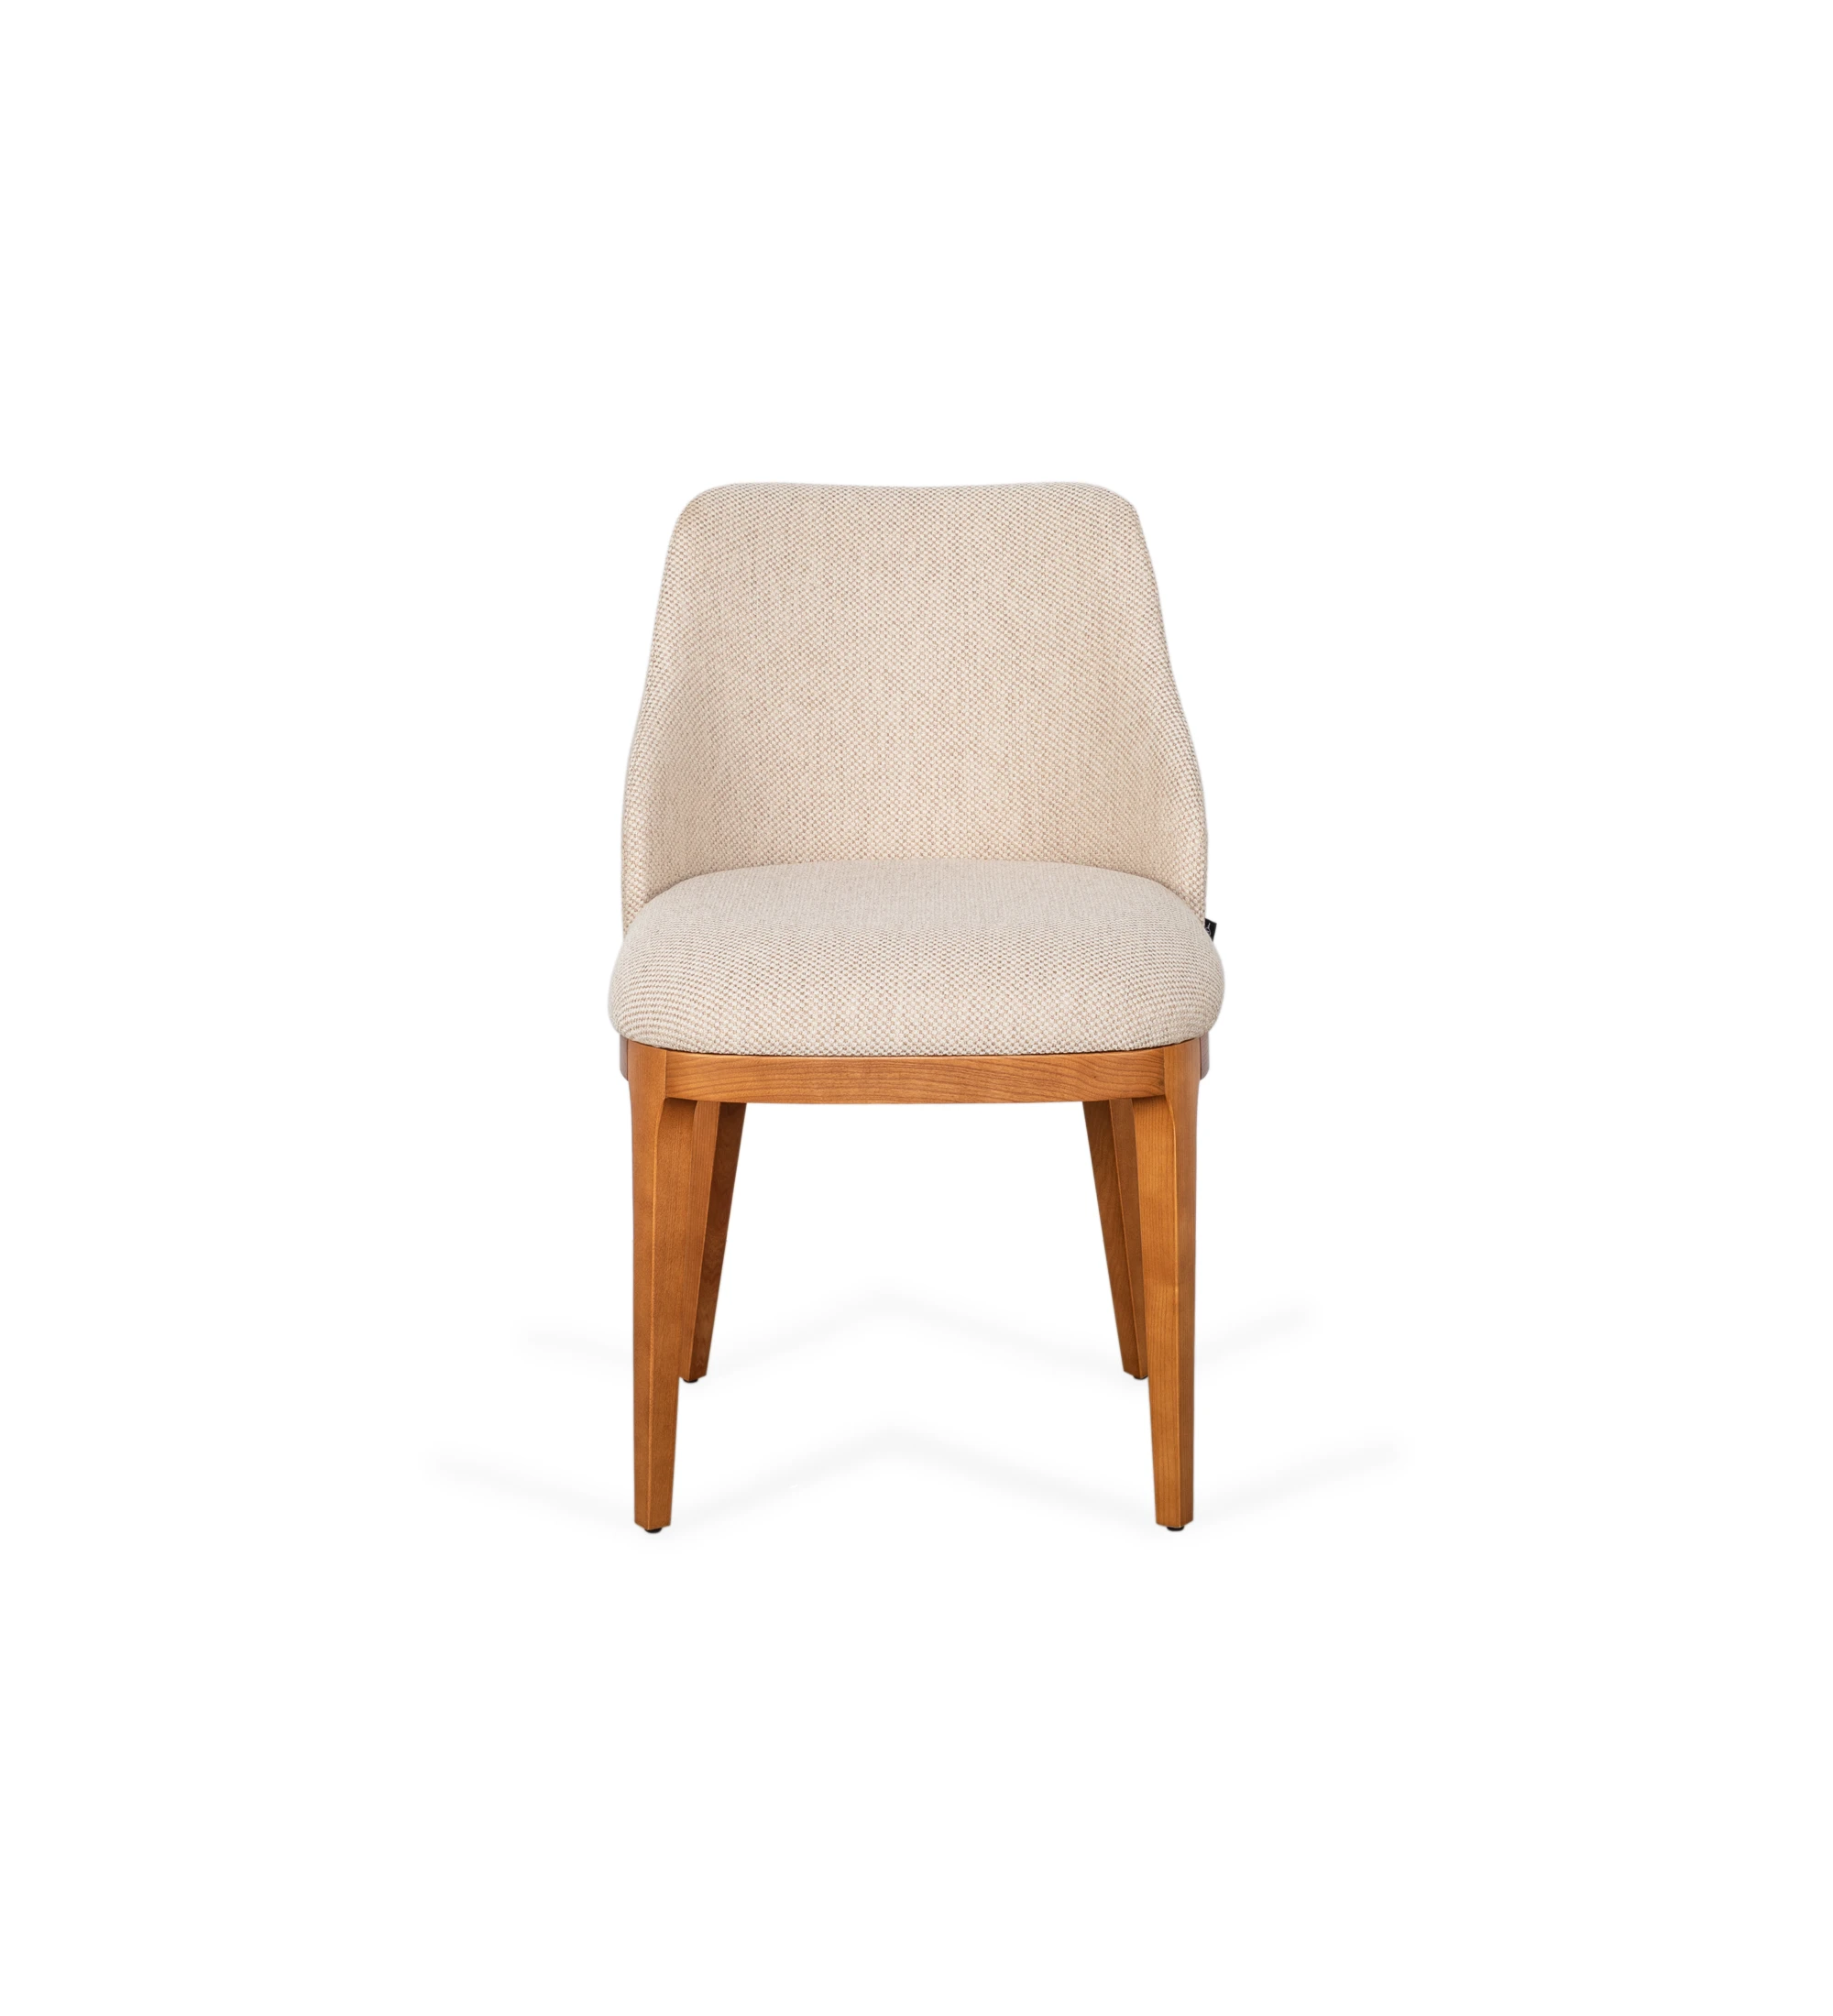 Cannes chair upholstered in beige fabric, feet in honey-colored natural wood.